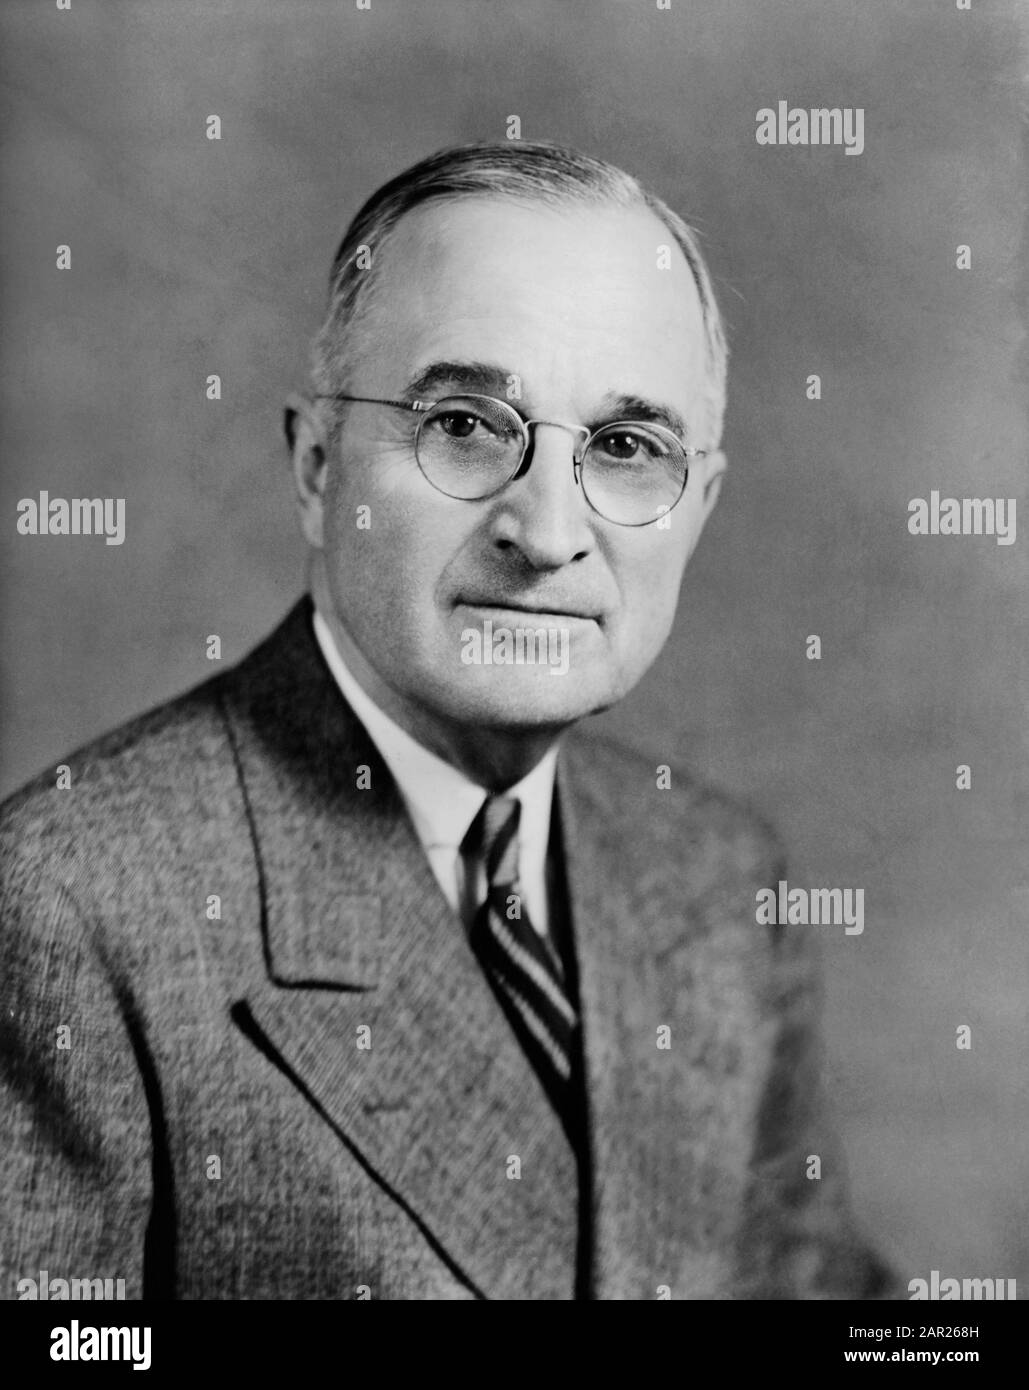 Harry S. Truman (1884-1972), 33rd President of the United States 1945-1953, Head and Shoulders Portrait, photograph by Edmonston Studio, June 1945 Stock Photo